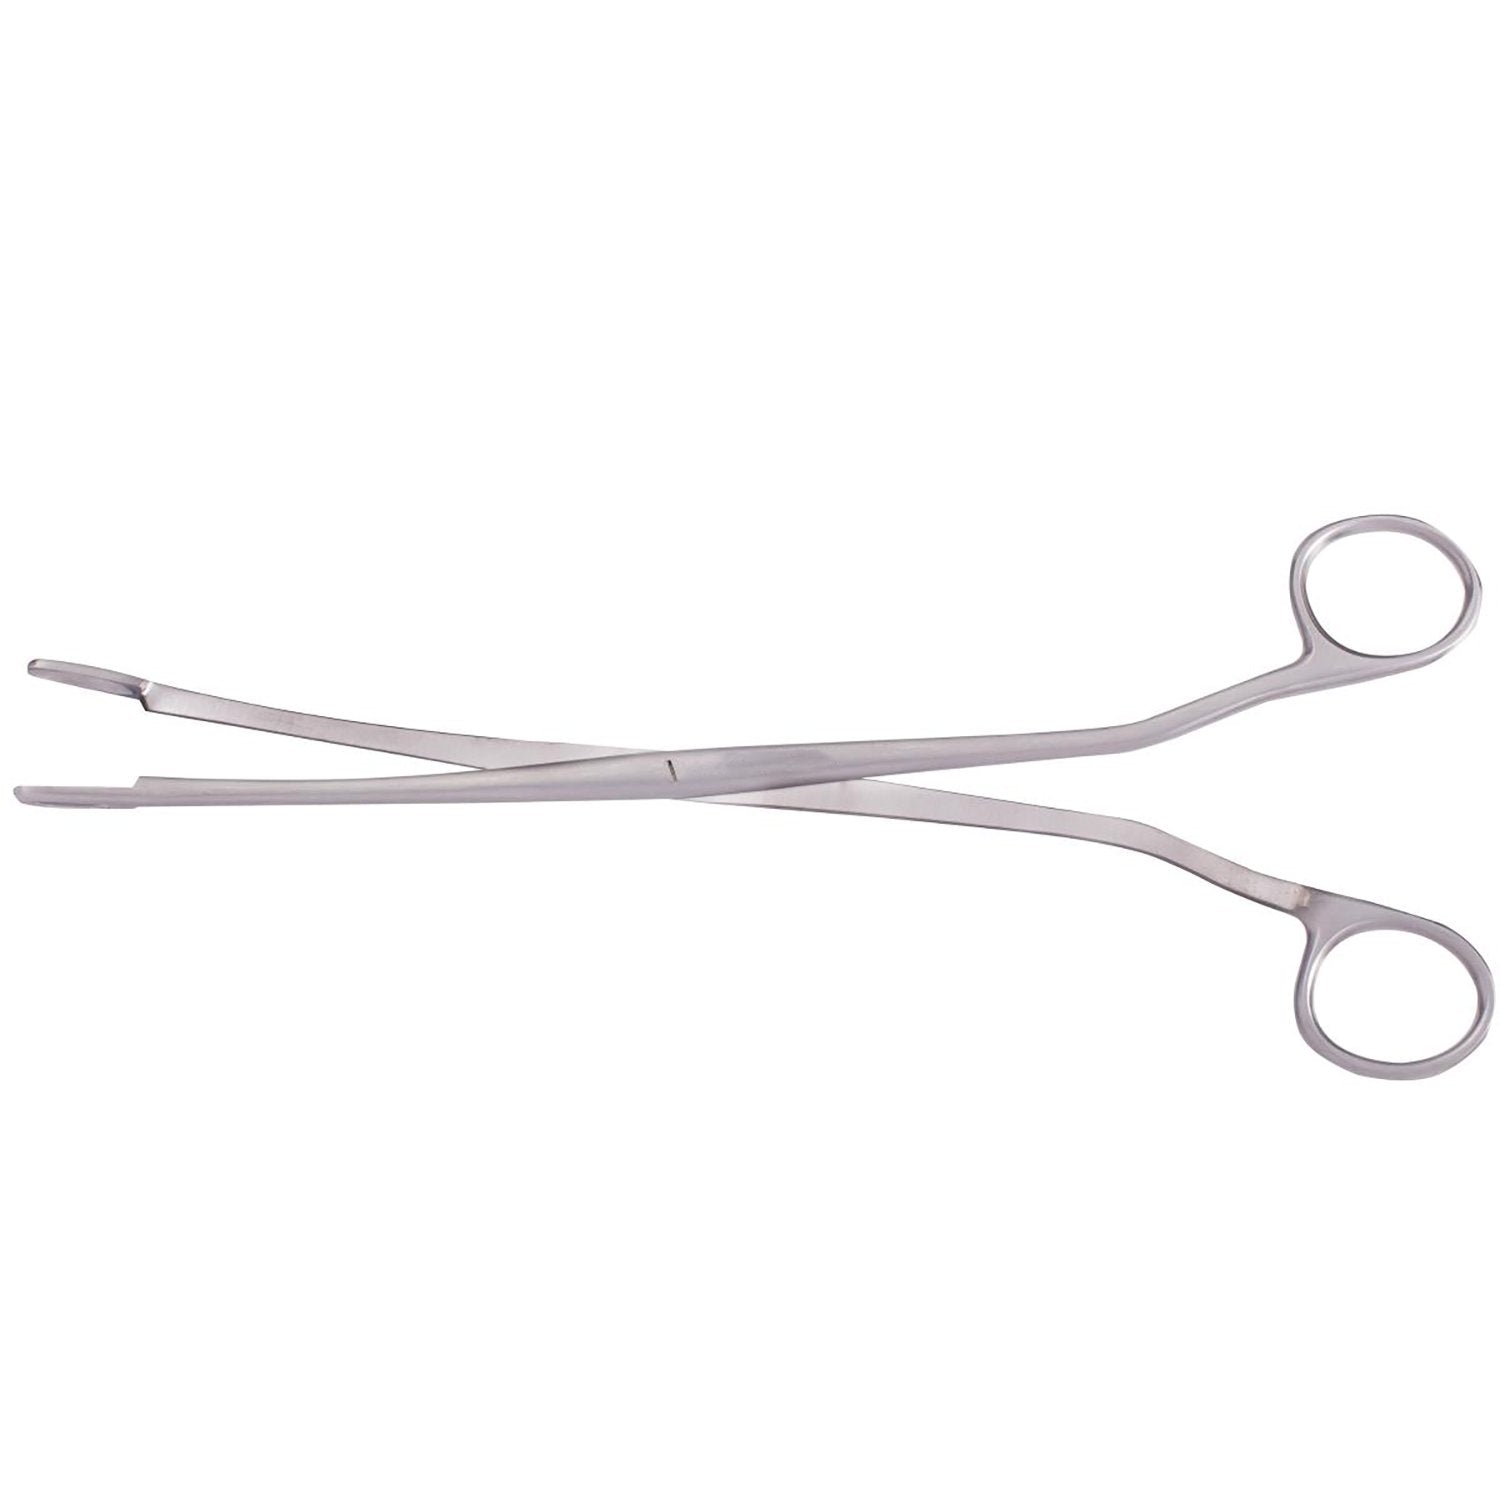 Rochester Gall Stone Forceps